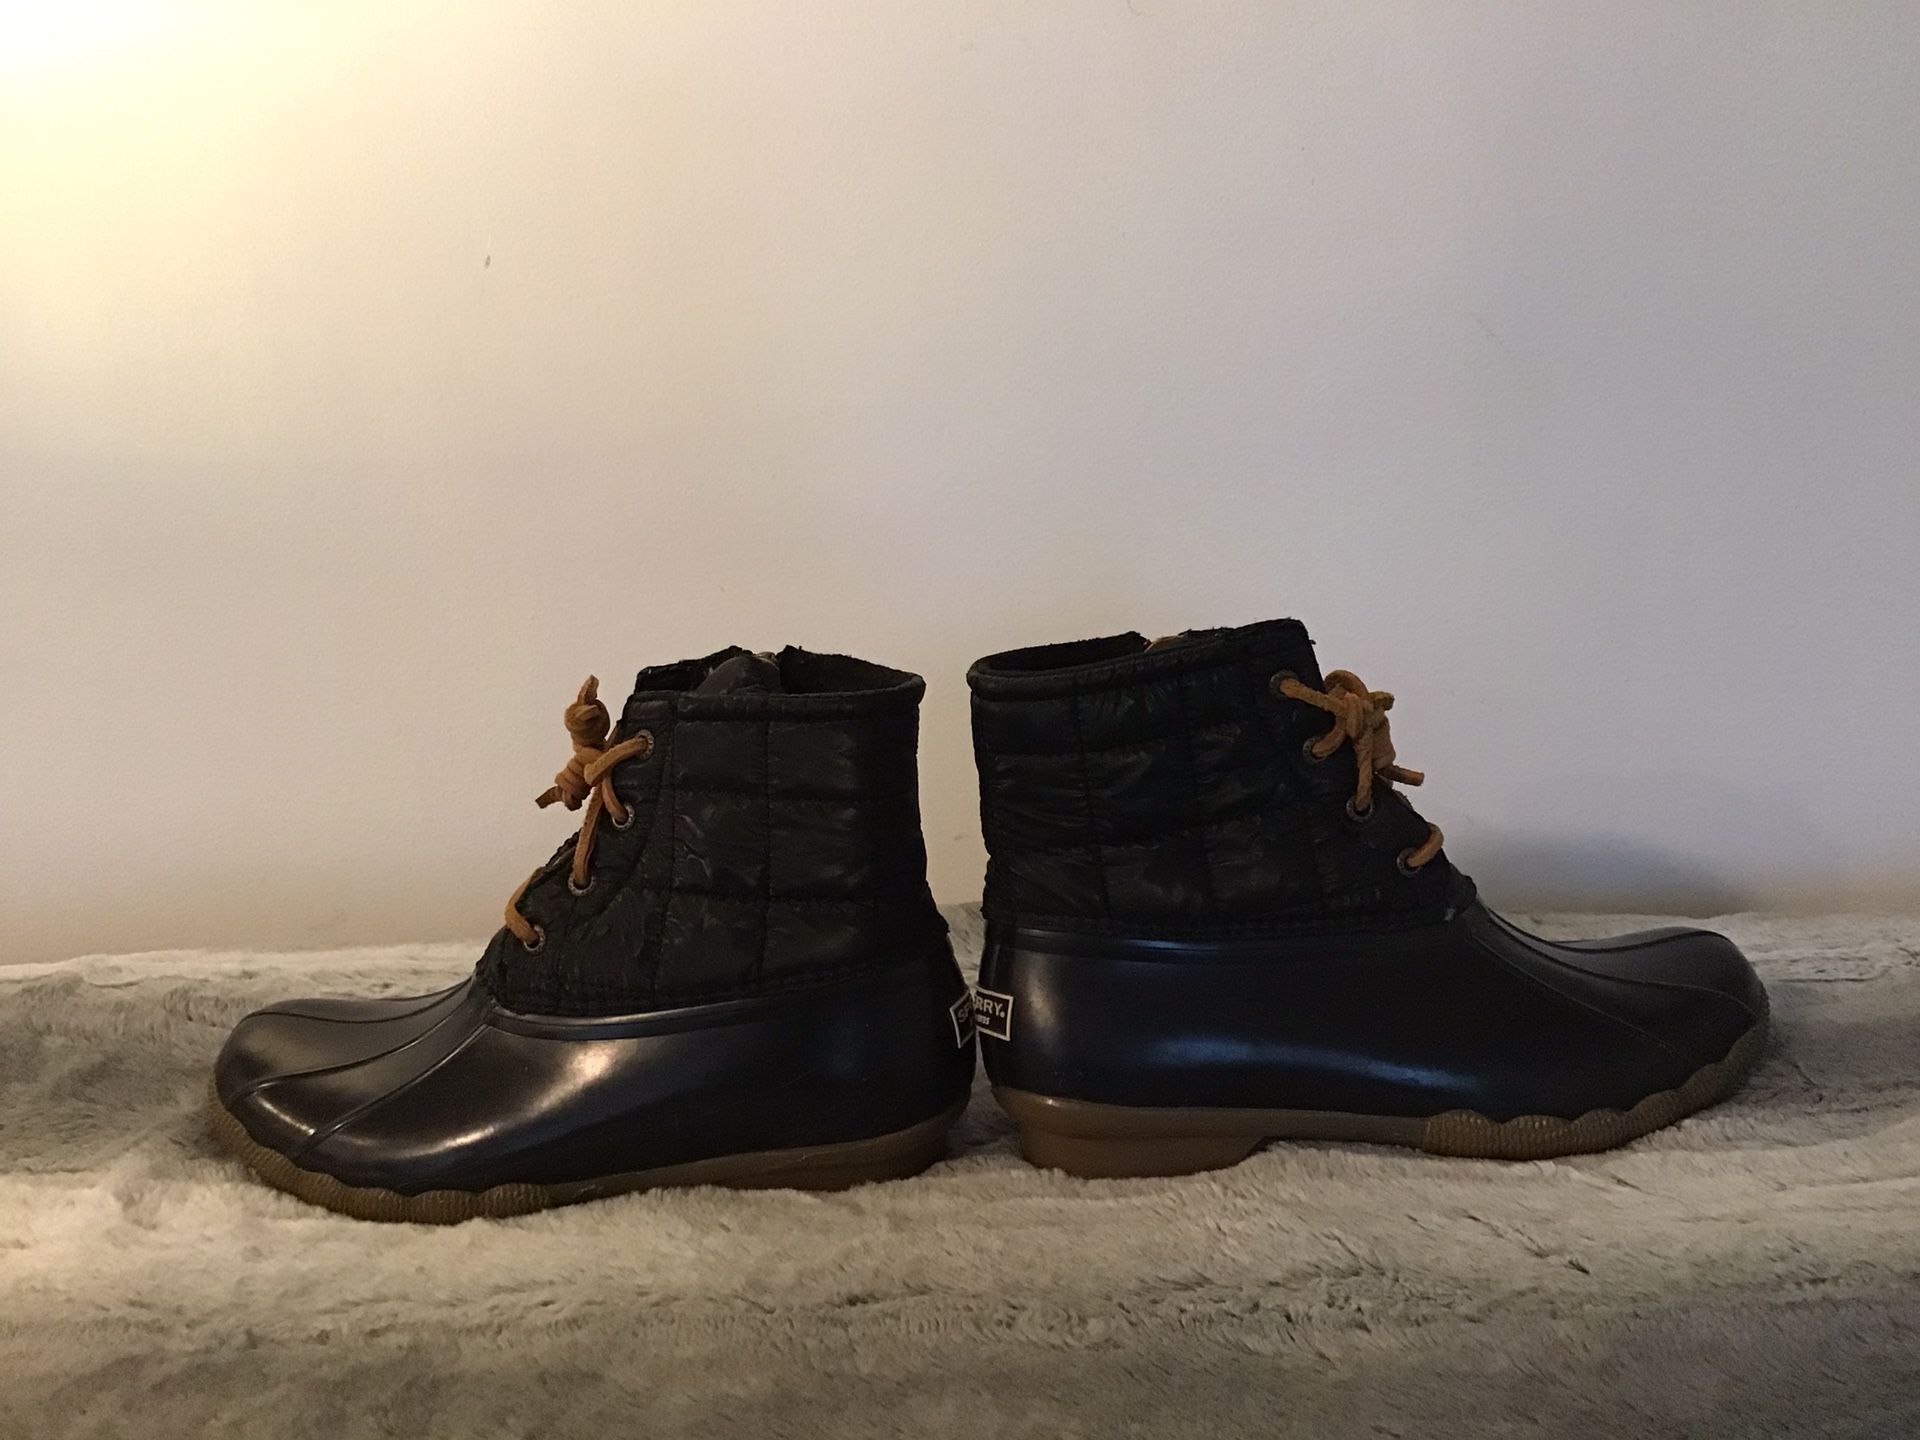 SPERRY rain snow boots, size 7.5